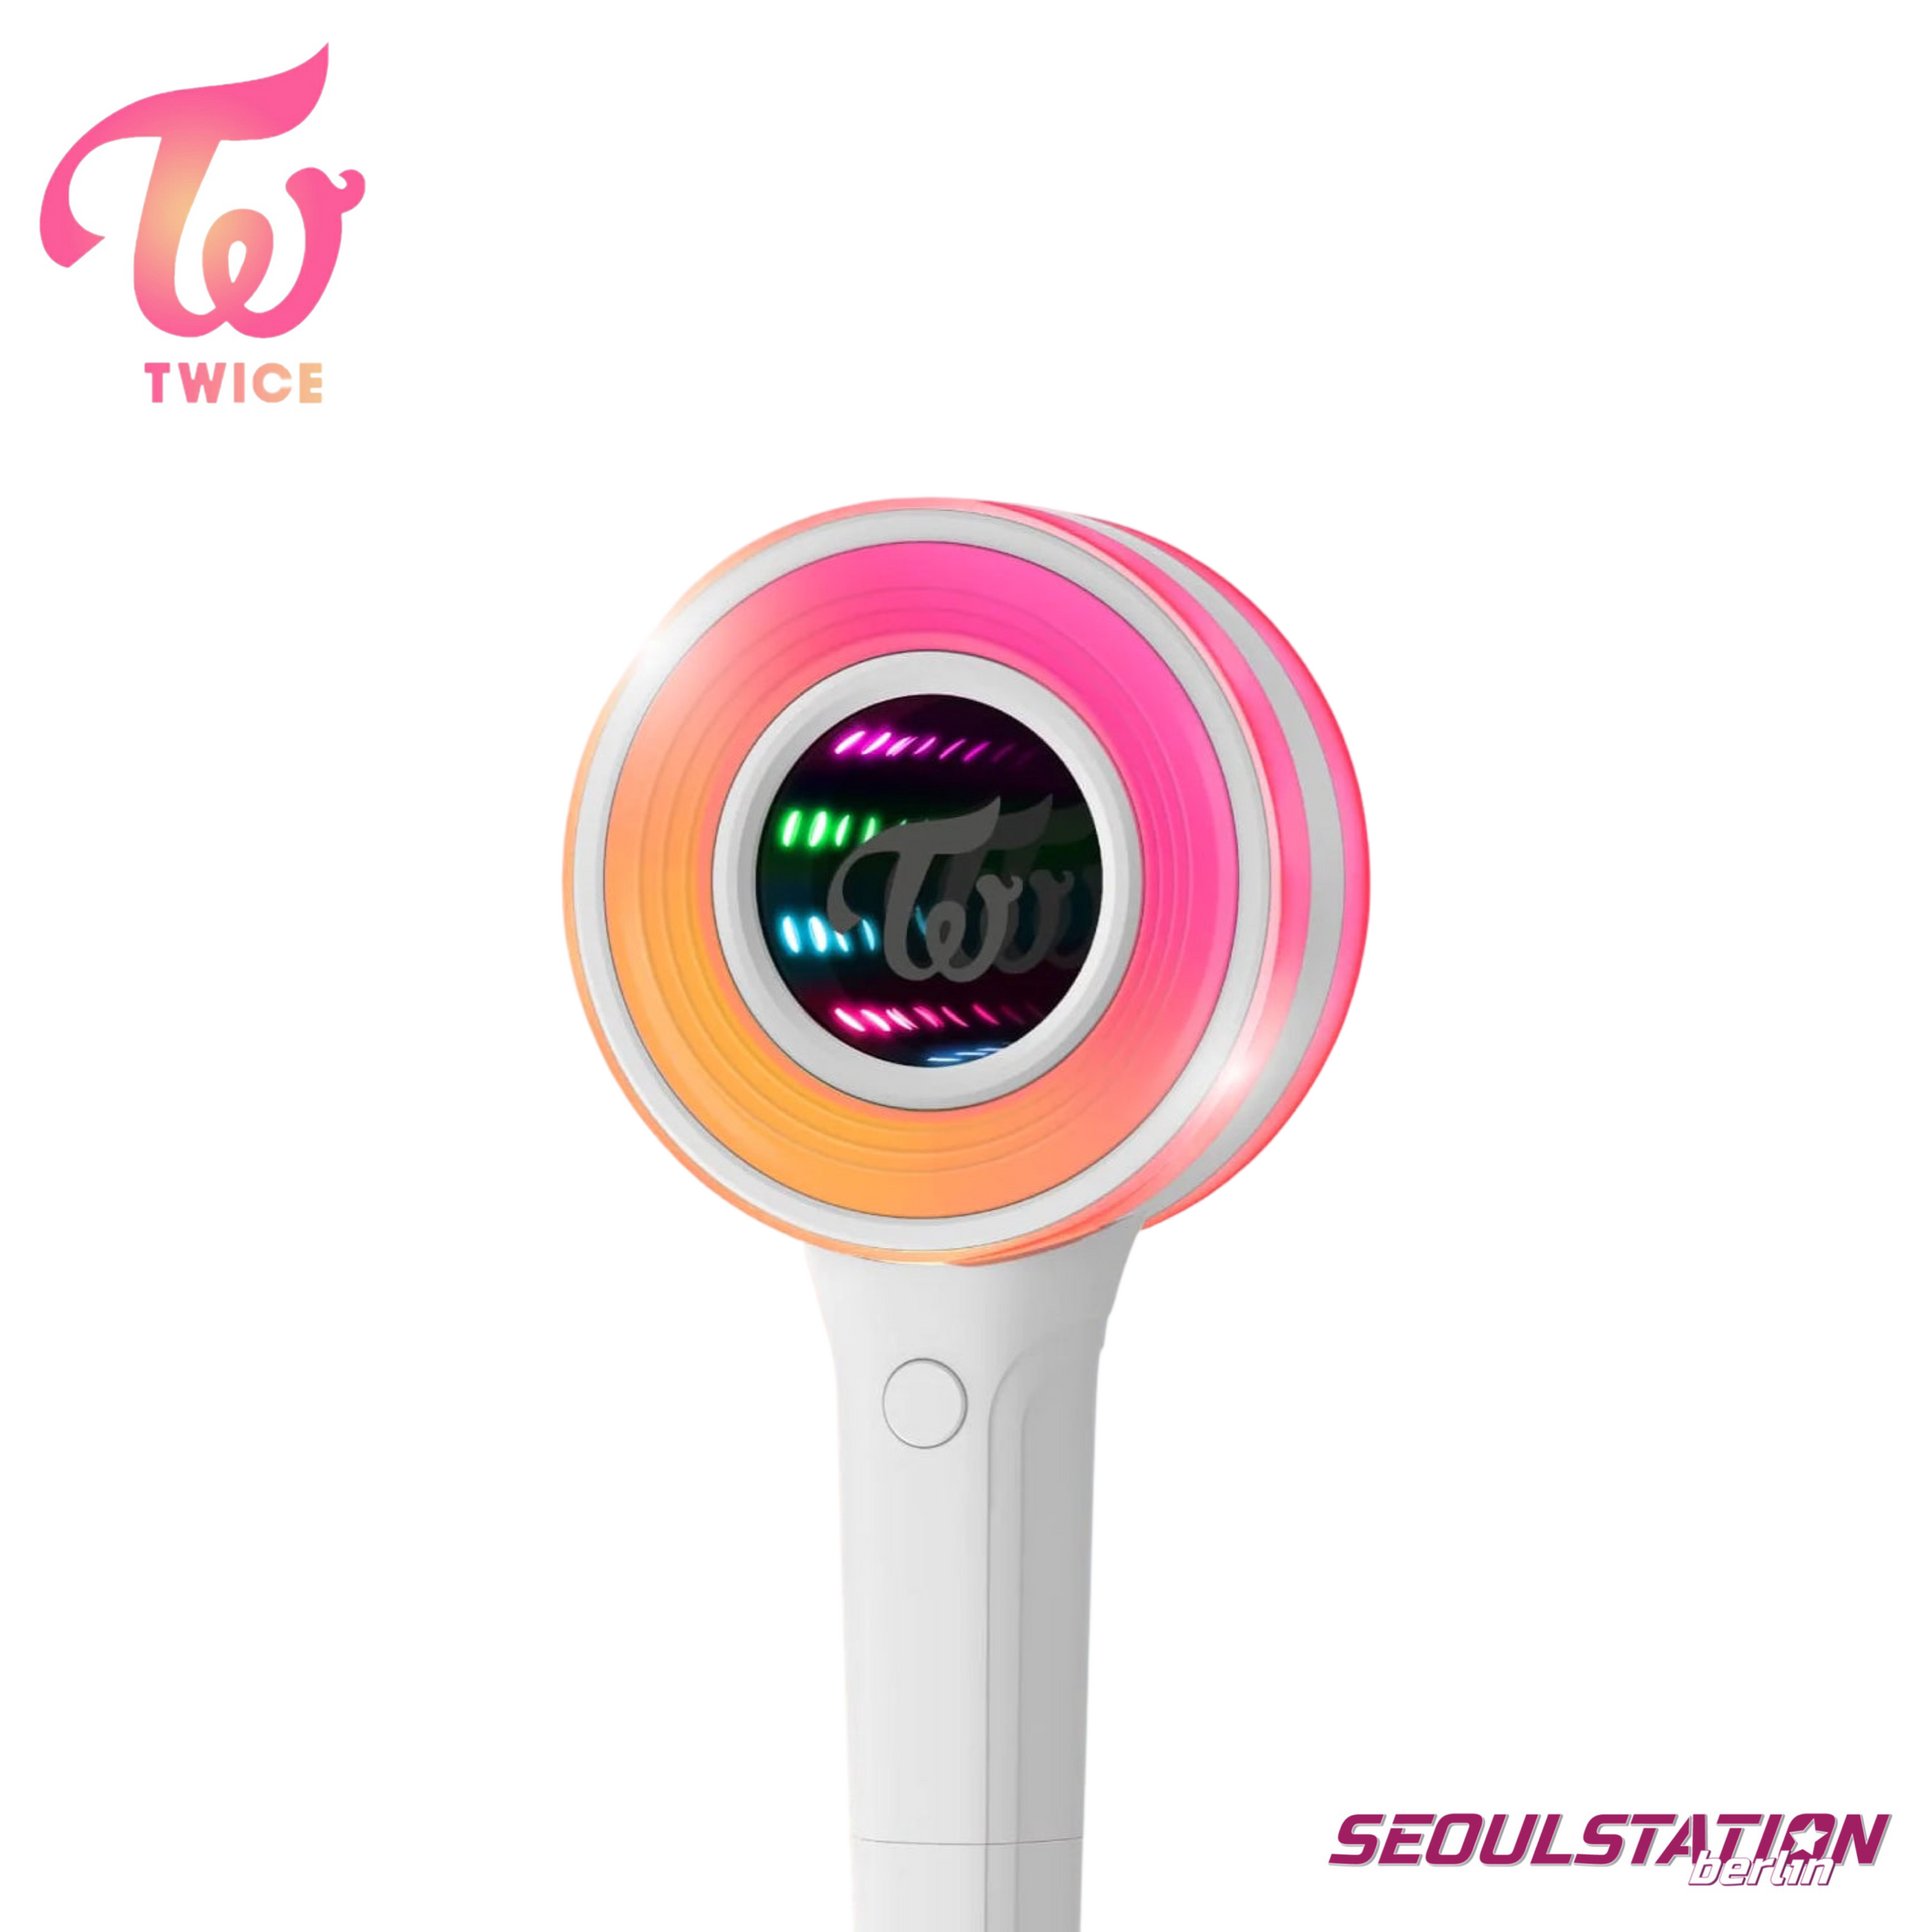 TWICE CANDYBONG ∞ OFFICIAL LIGHT STICK (INFINITY VERSION), 40% OFF